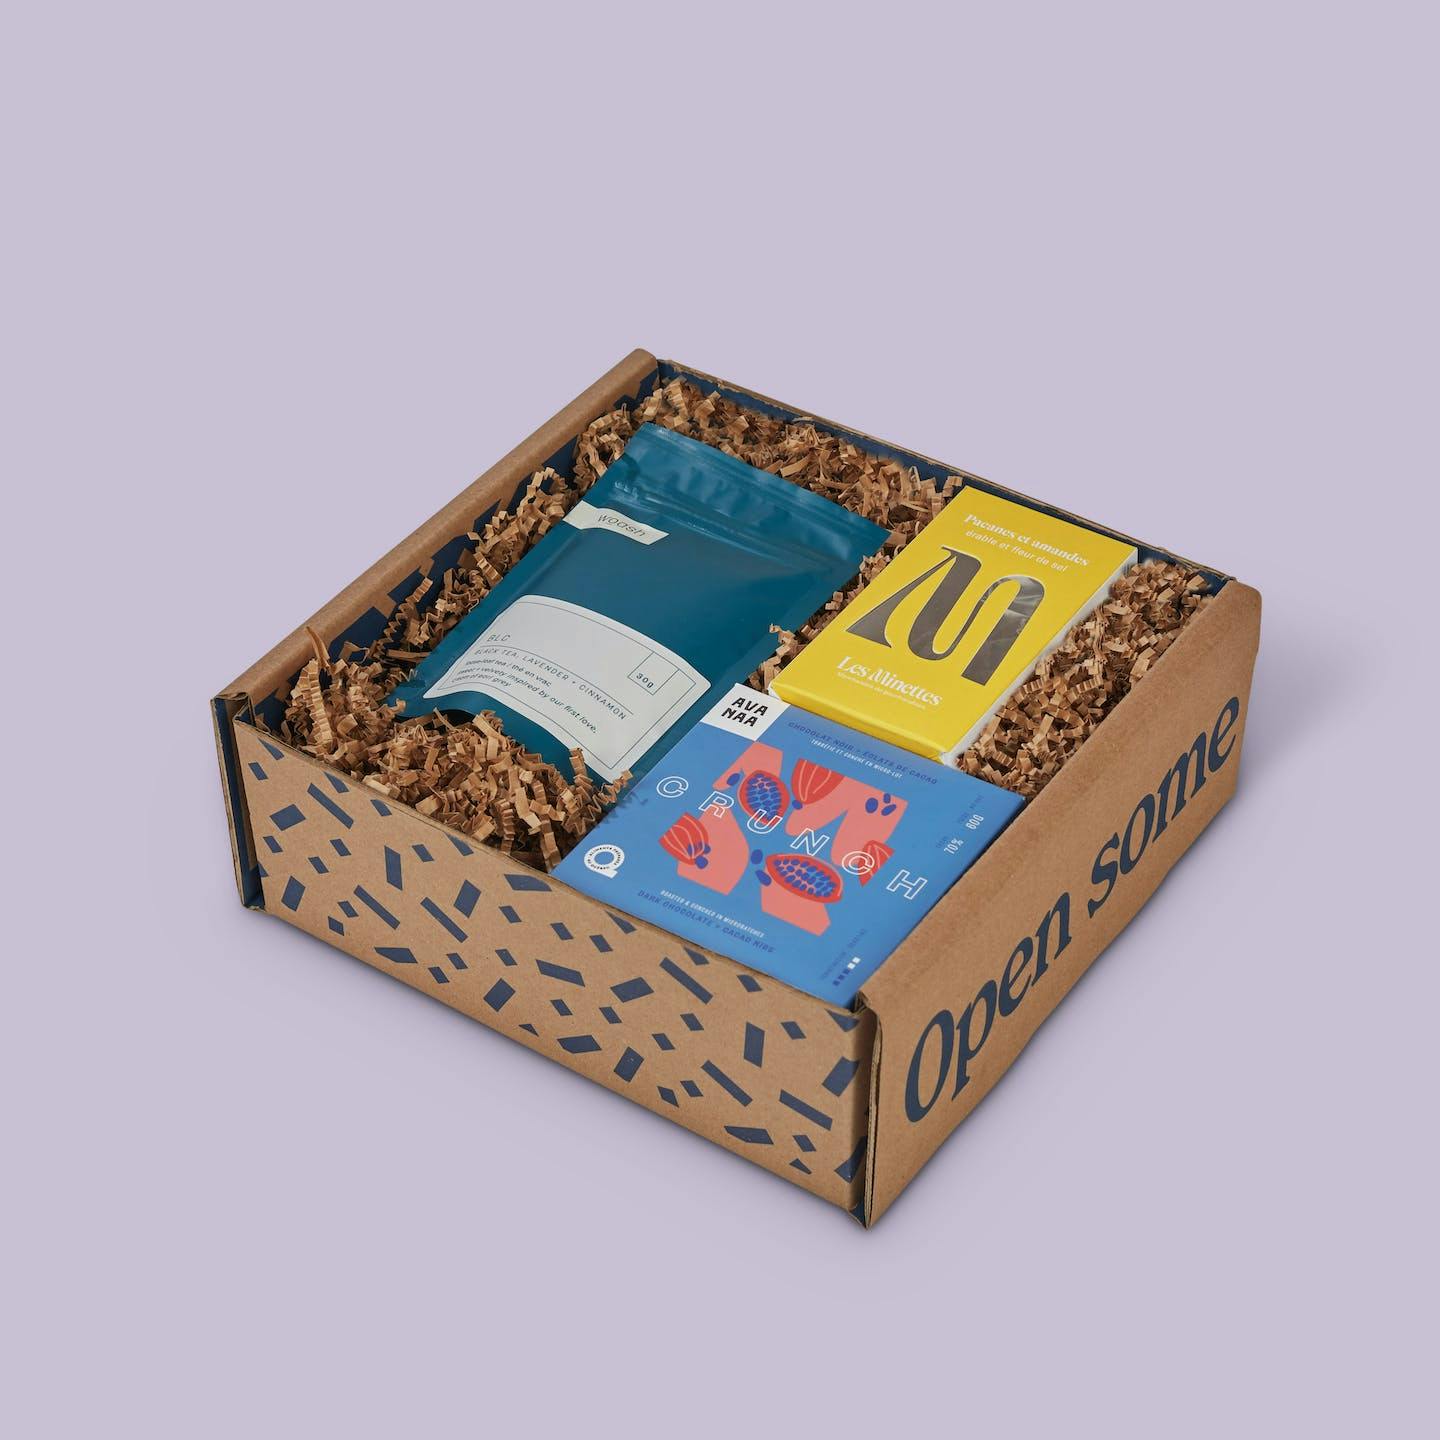 Saul Good Gift Box with products from Les Minettes, Avanaa and Woash